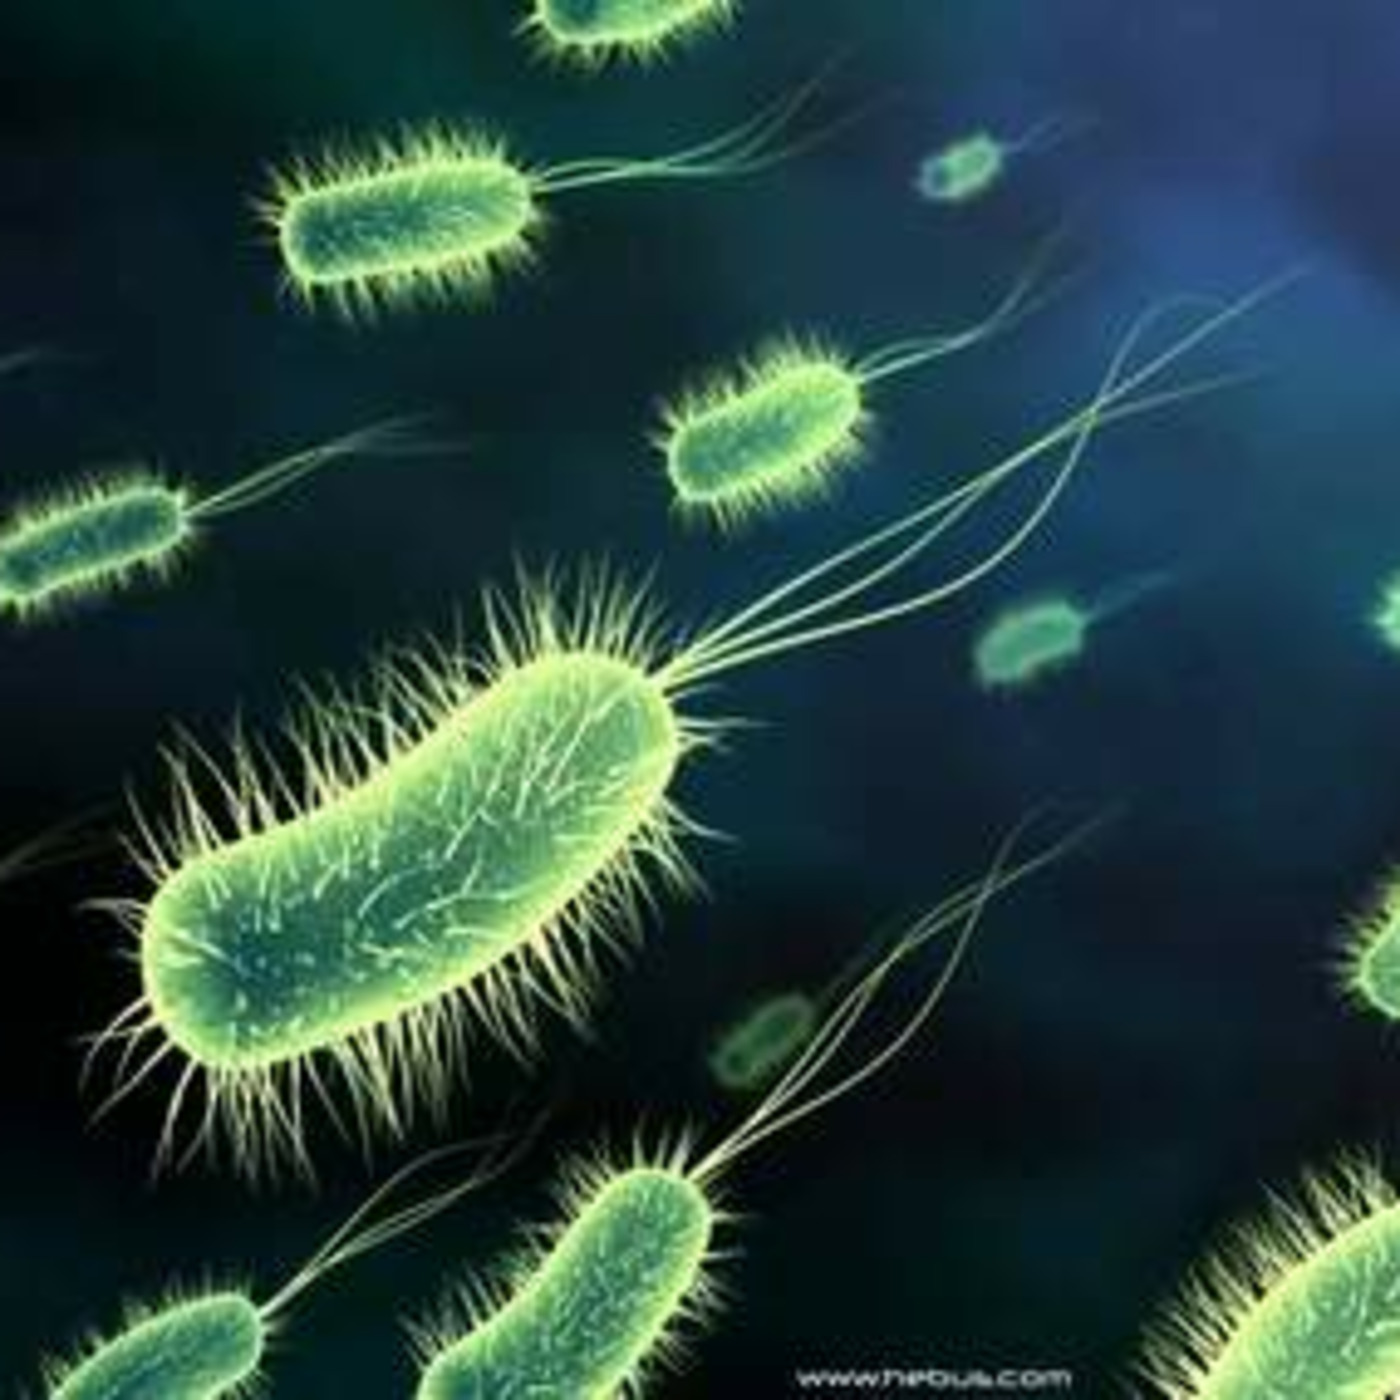 Bacteria, Disease, Infections, and Agribuisness